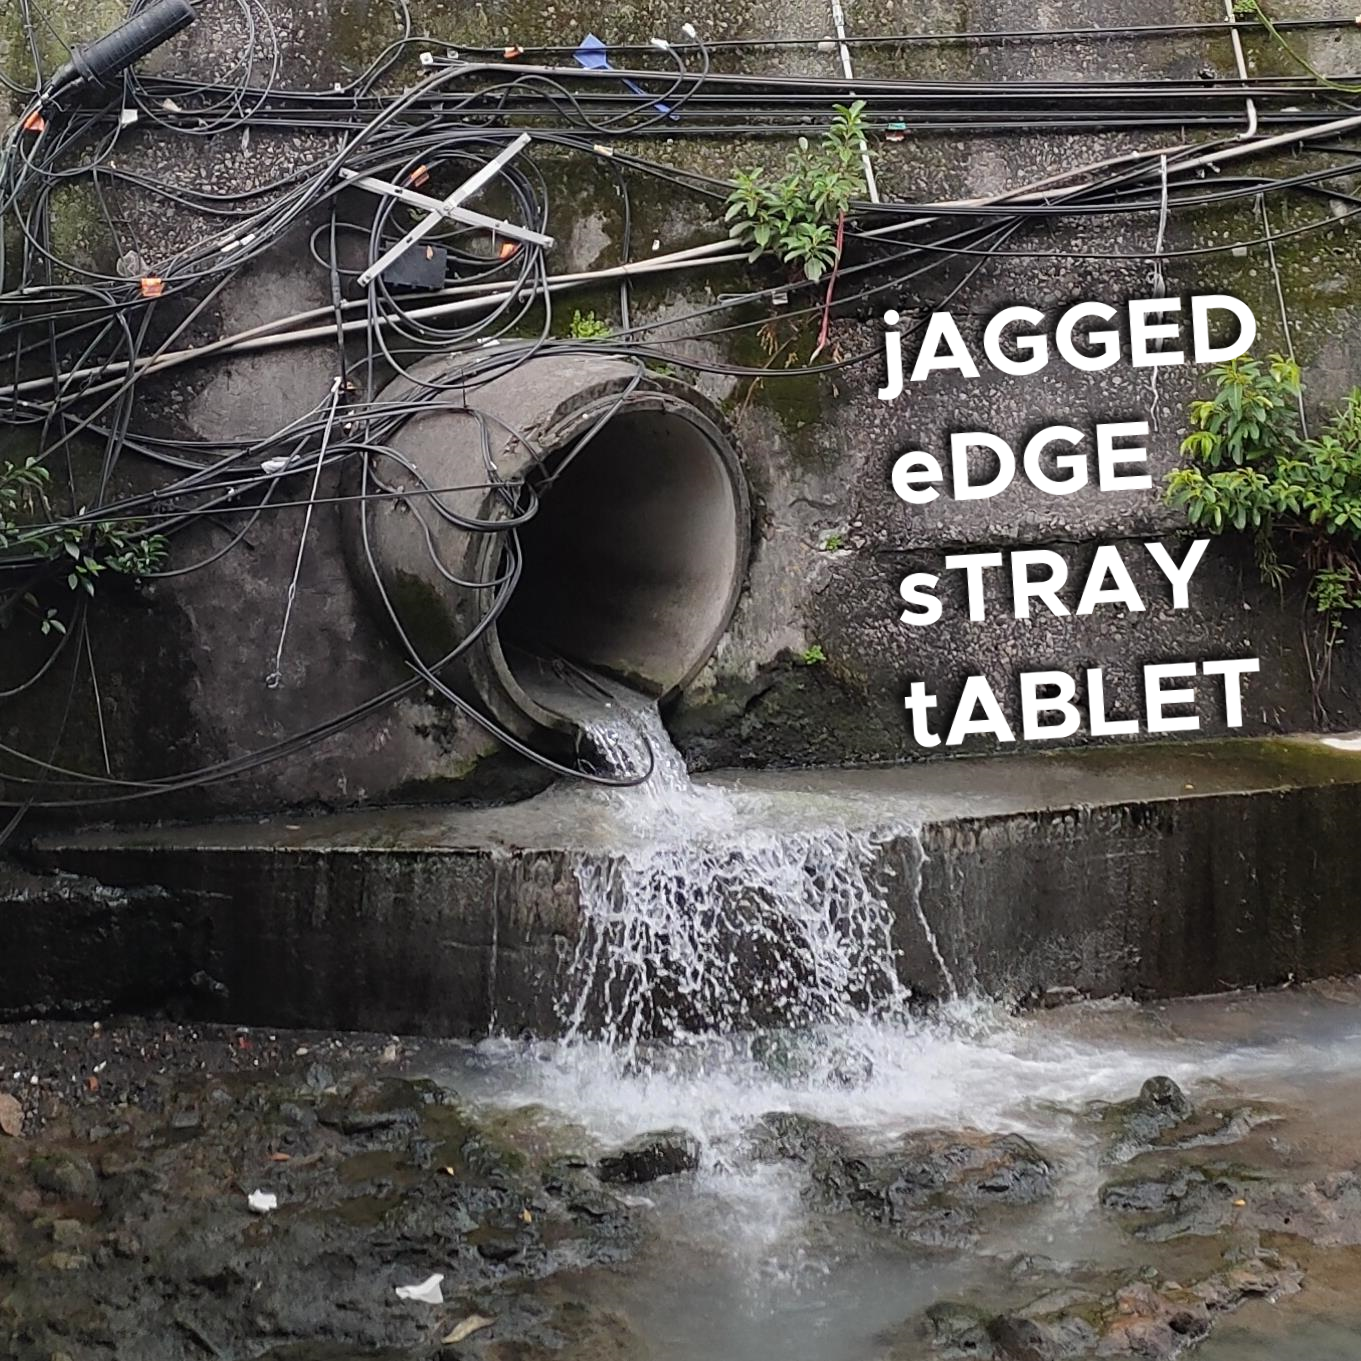 Jagged Edge by Stray Tablet